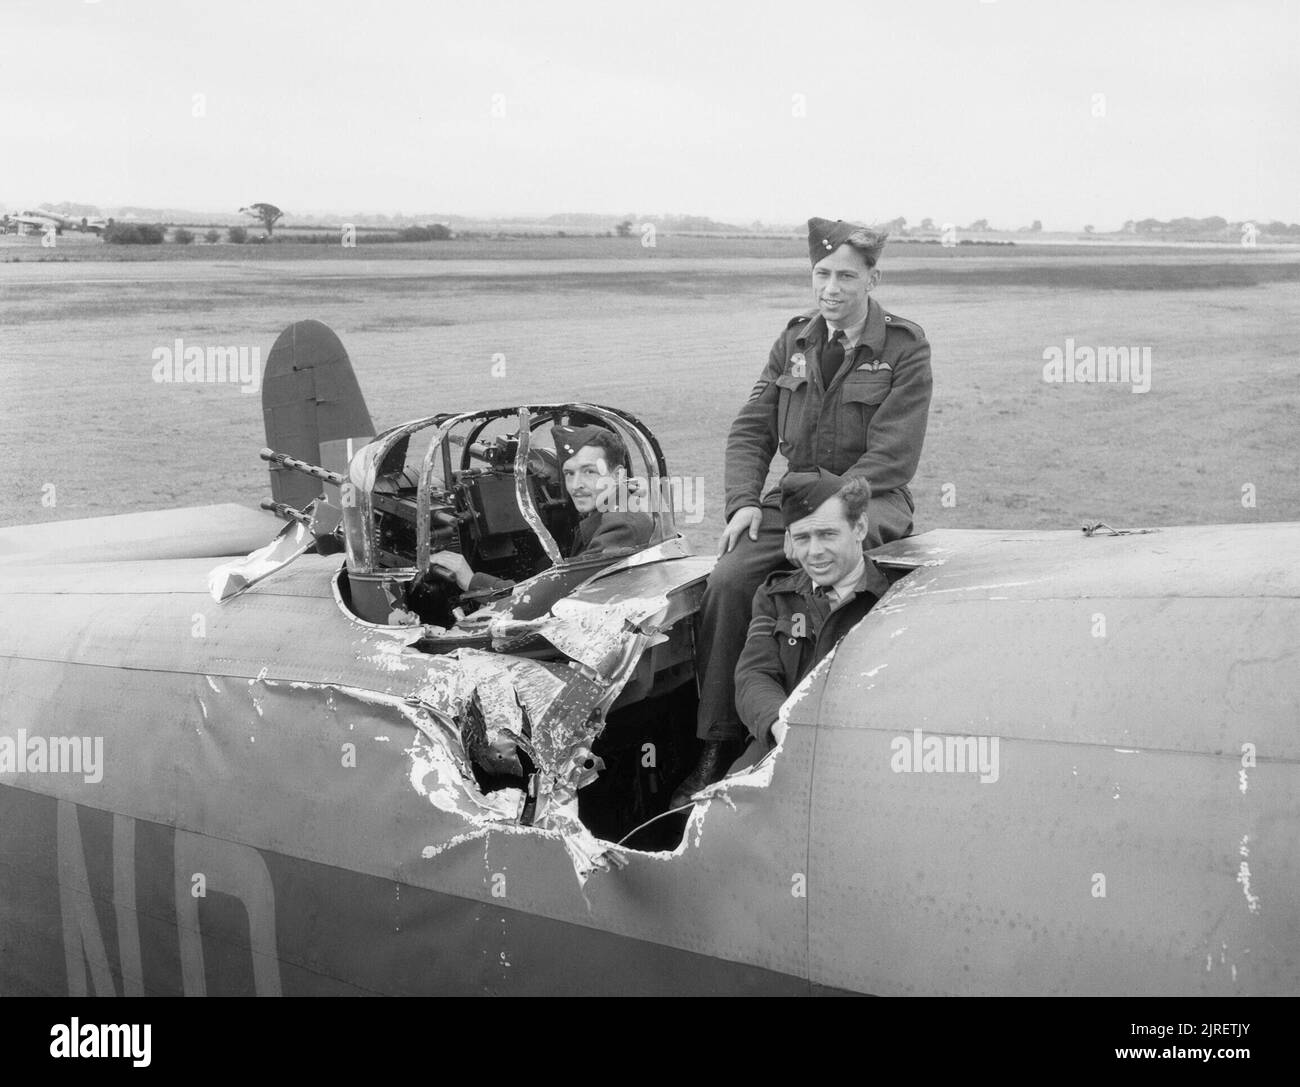 Royal Air Force Bomber Command, 1942-1945. Sergeant D Cameron, the pilot of Handley Page Halifax B Mark II, HR837 'NP-F', of No. 158 Squadron RAF, poses with two of his crew amidst the damage caused when it was hit by a falling bomb from another aircraft while raiding Cologne on the night of 28/29 June 1943. In spite of the severe damage to the fuselage, none of the crew were injured and Cameron managed to fly HR837 back to the Squadron's base at Lissett, Yorkshire. HR837 was repaired and flew a further 11 operations with the Squadron before being turned over to No. 1656 Heavy Conversion Unit. Stock Photo